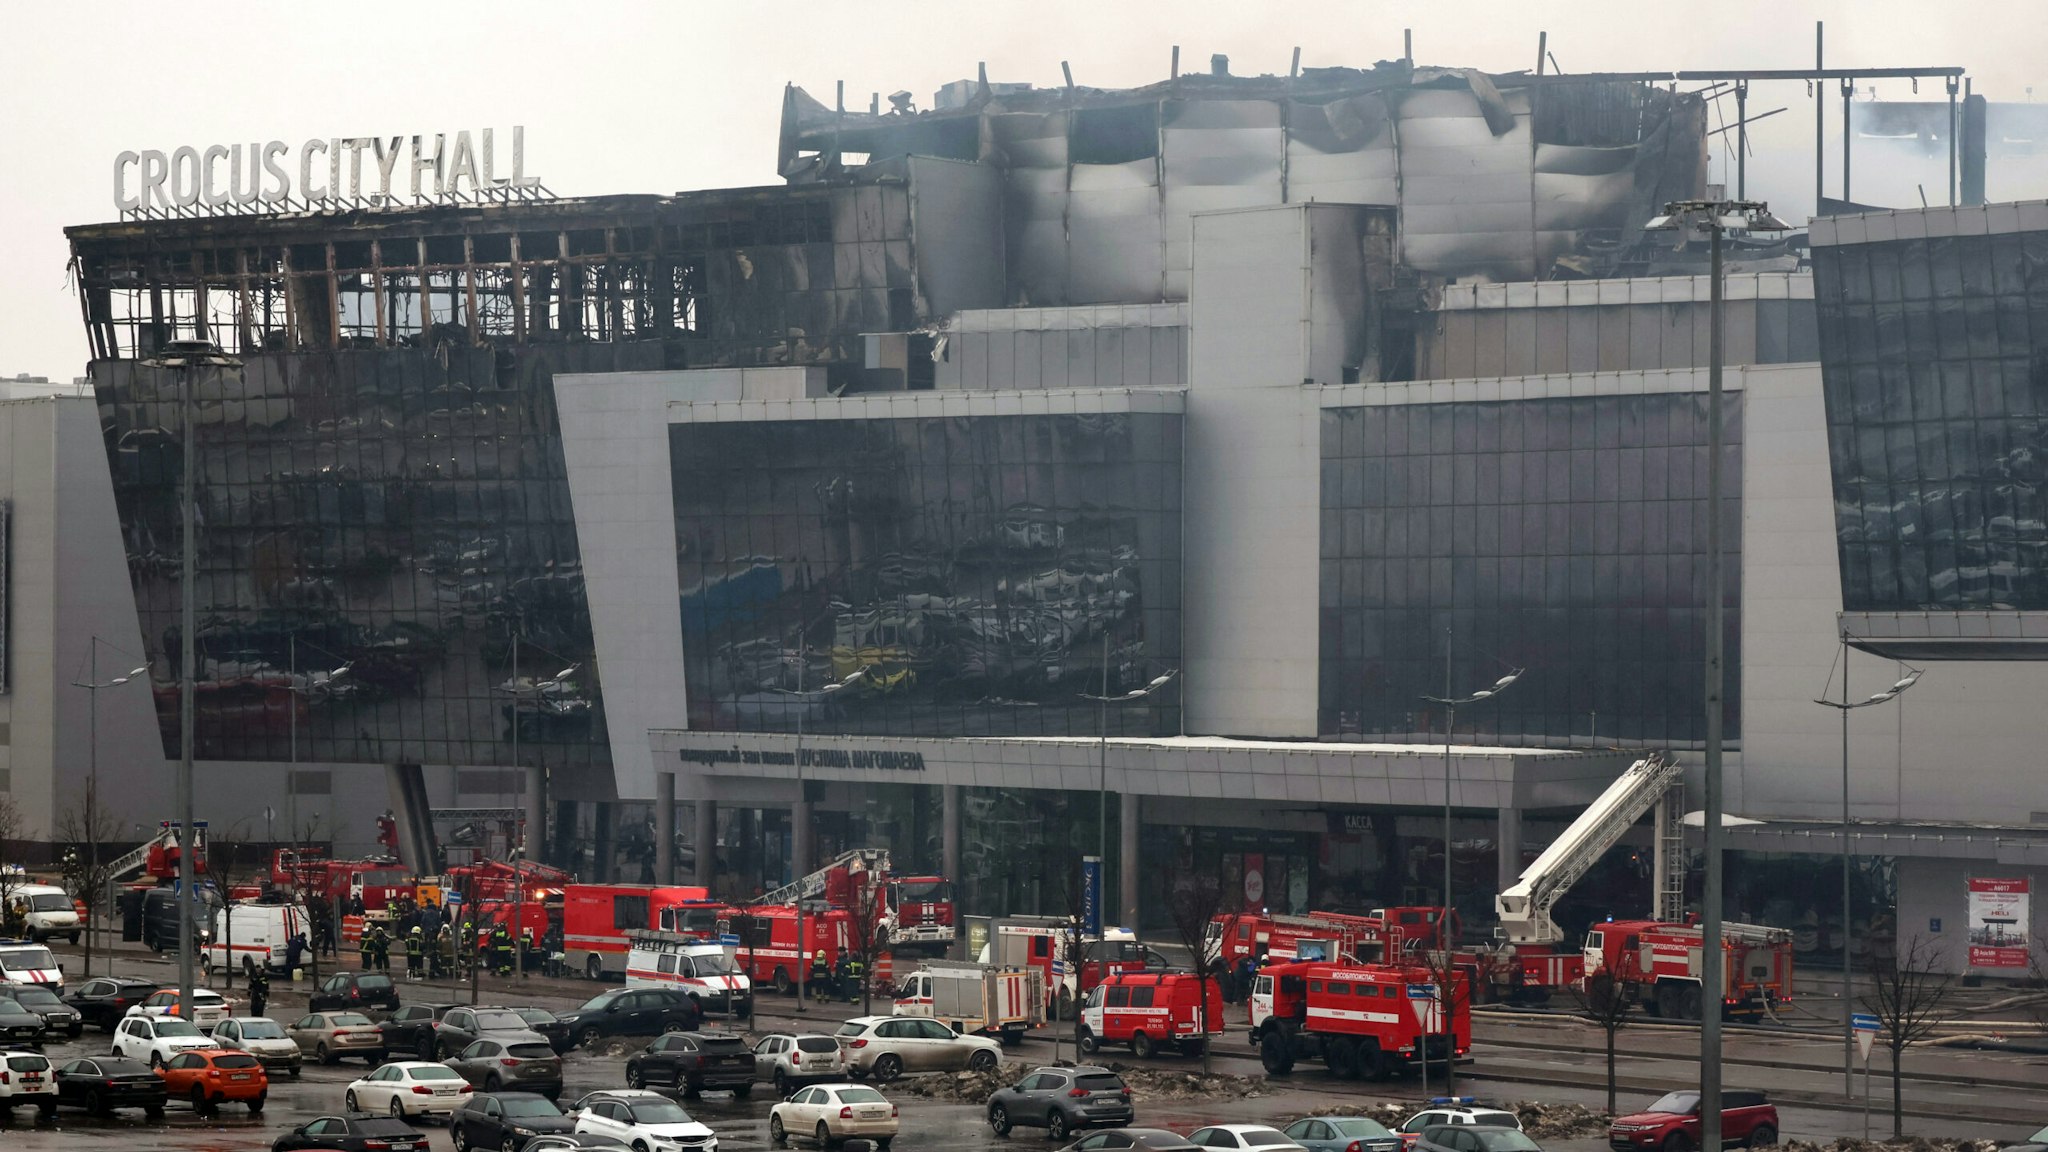 TOPSHOT - Members of emergency services work at the scene of the gun attack at the Crocus City Hall concert hall in Krasnogorsk, outside Moscow, on March 23, 2024. Gunmen who opened fire at a Moscow concert hall killed more than 60 people and wounded over 100 while sparking an inferno, authorities said on March 23, 2024, with the Islamic State group claiming responsibility.